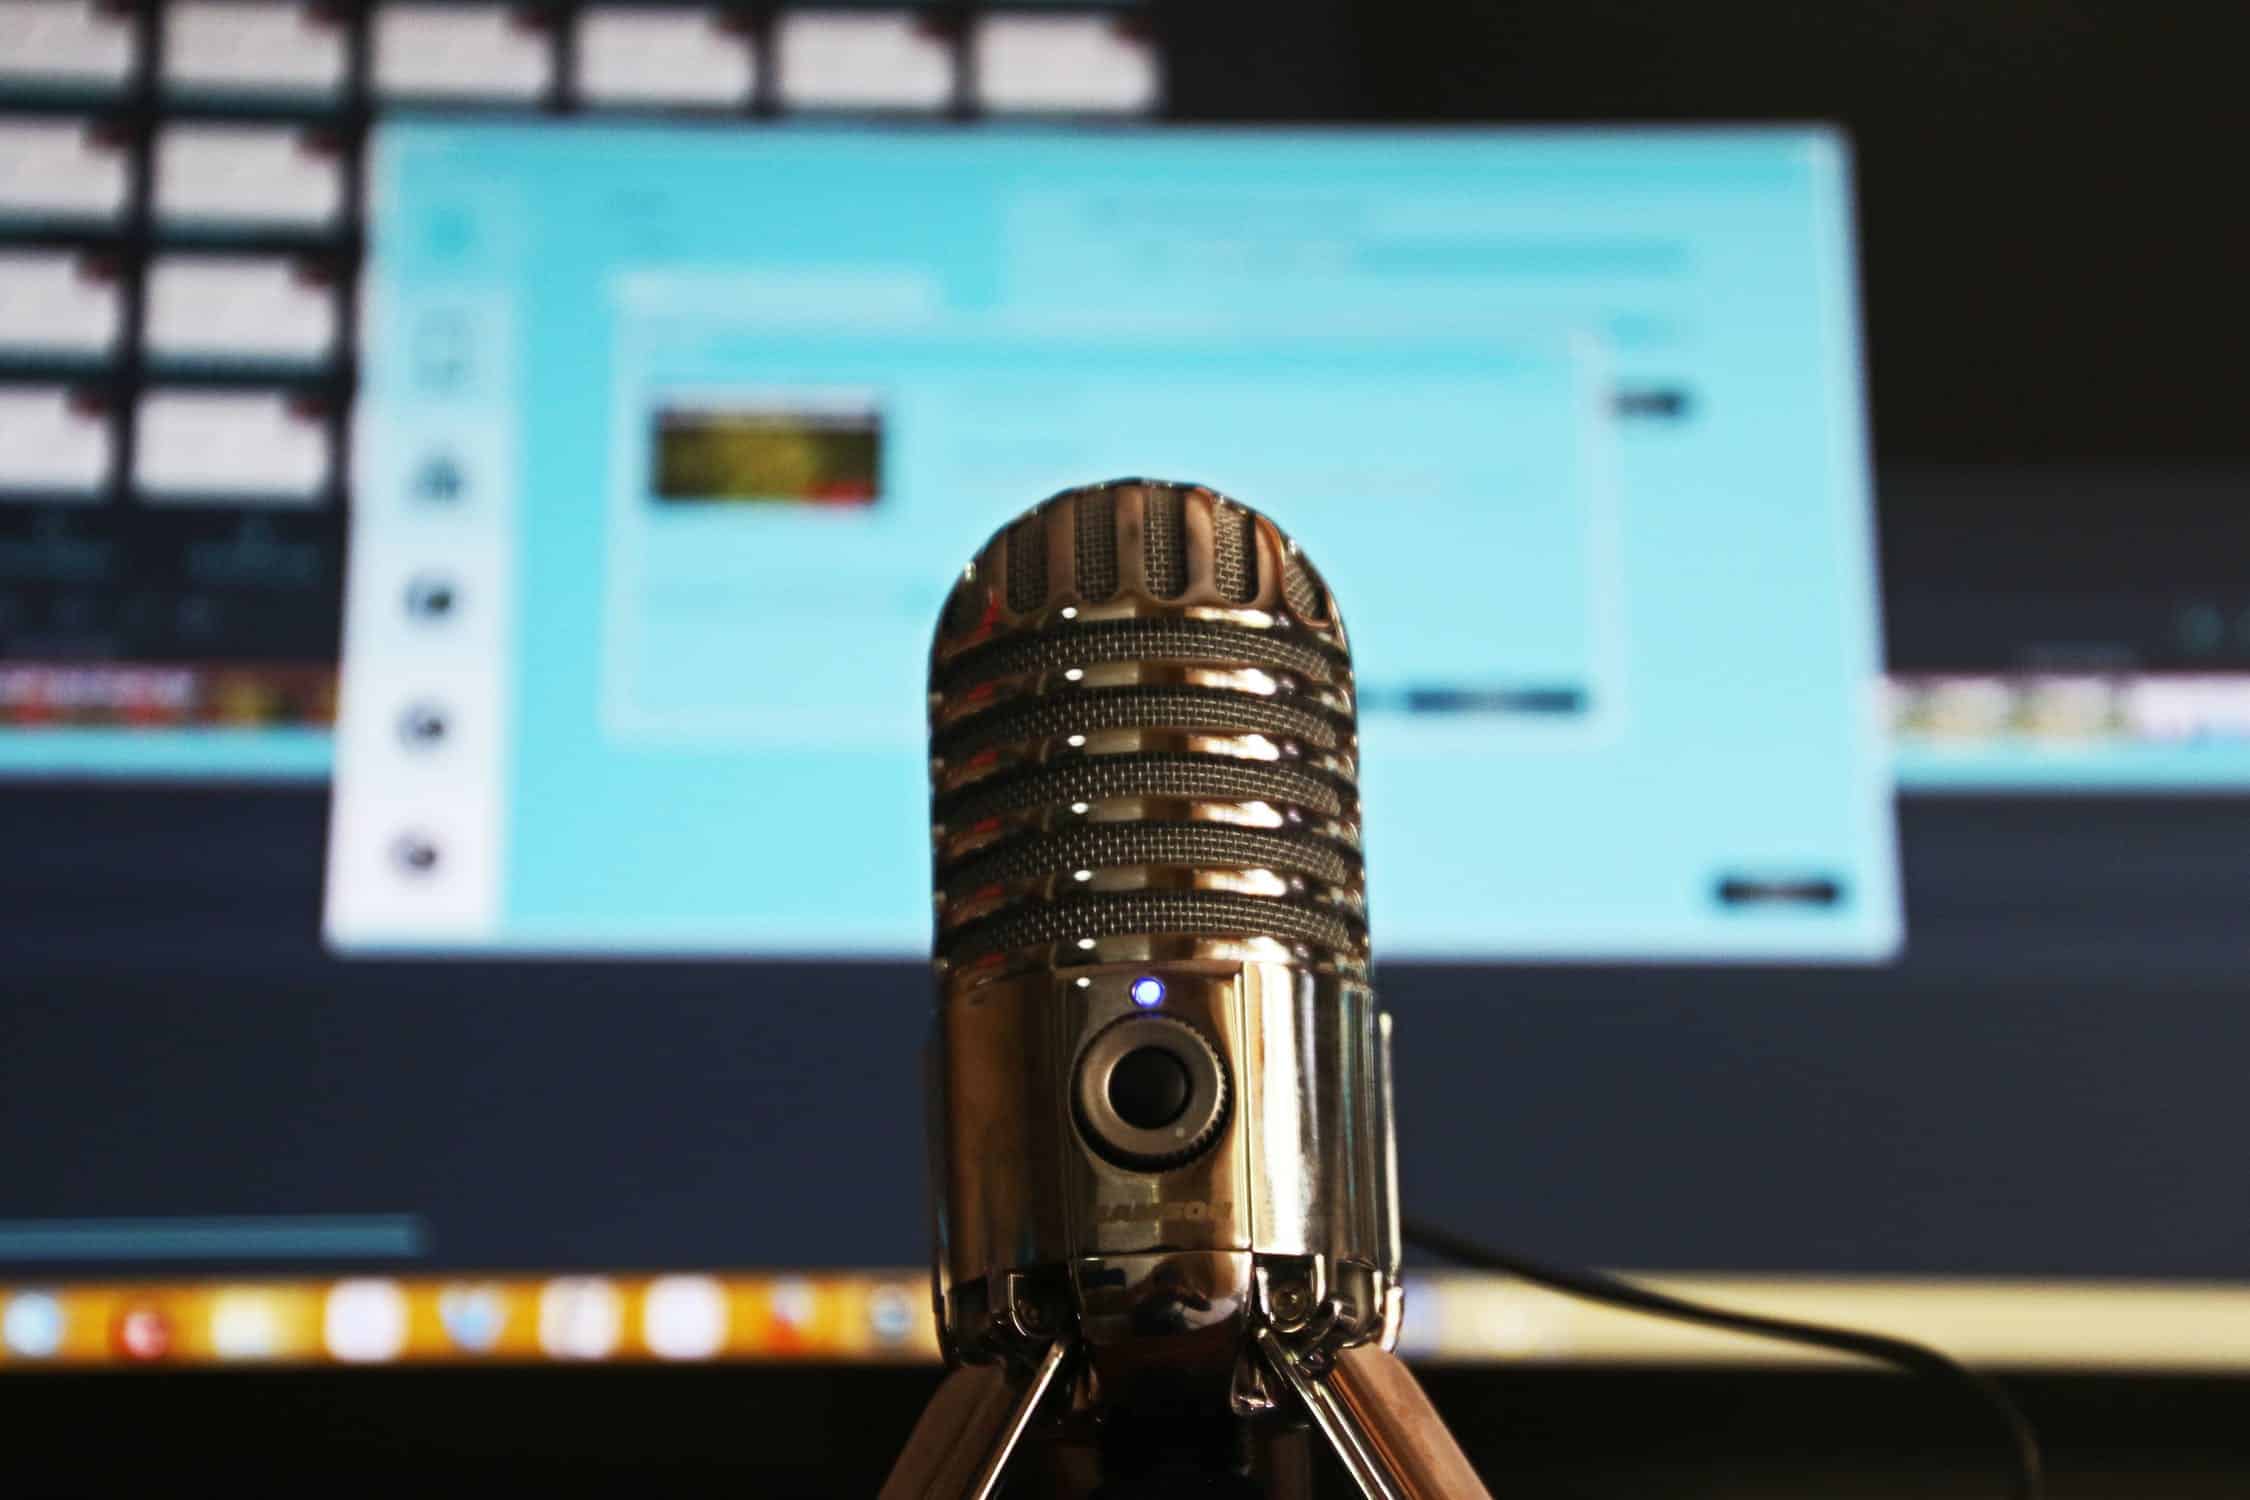 30 Podcast Description Templates To Help Write Your Own